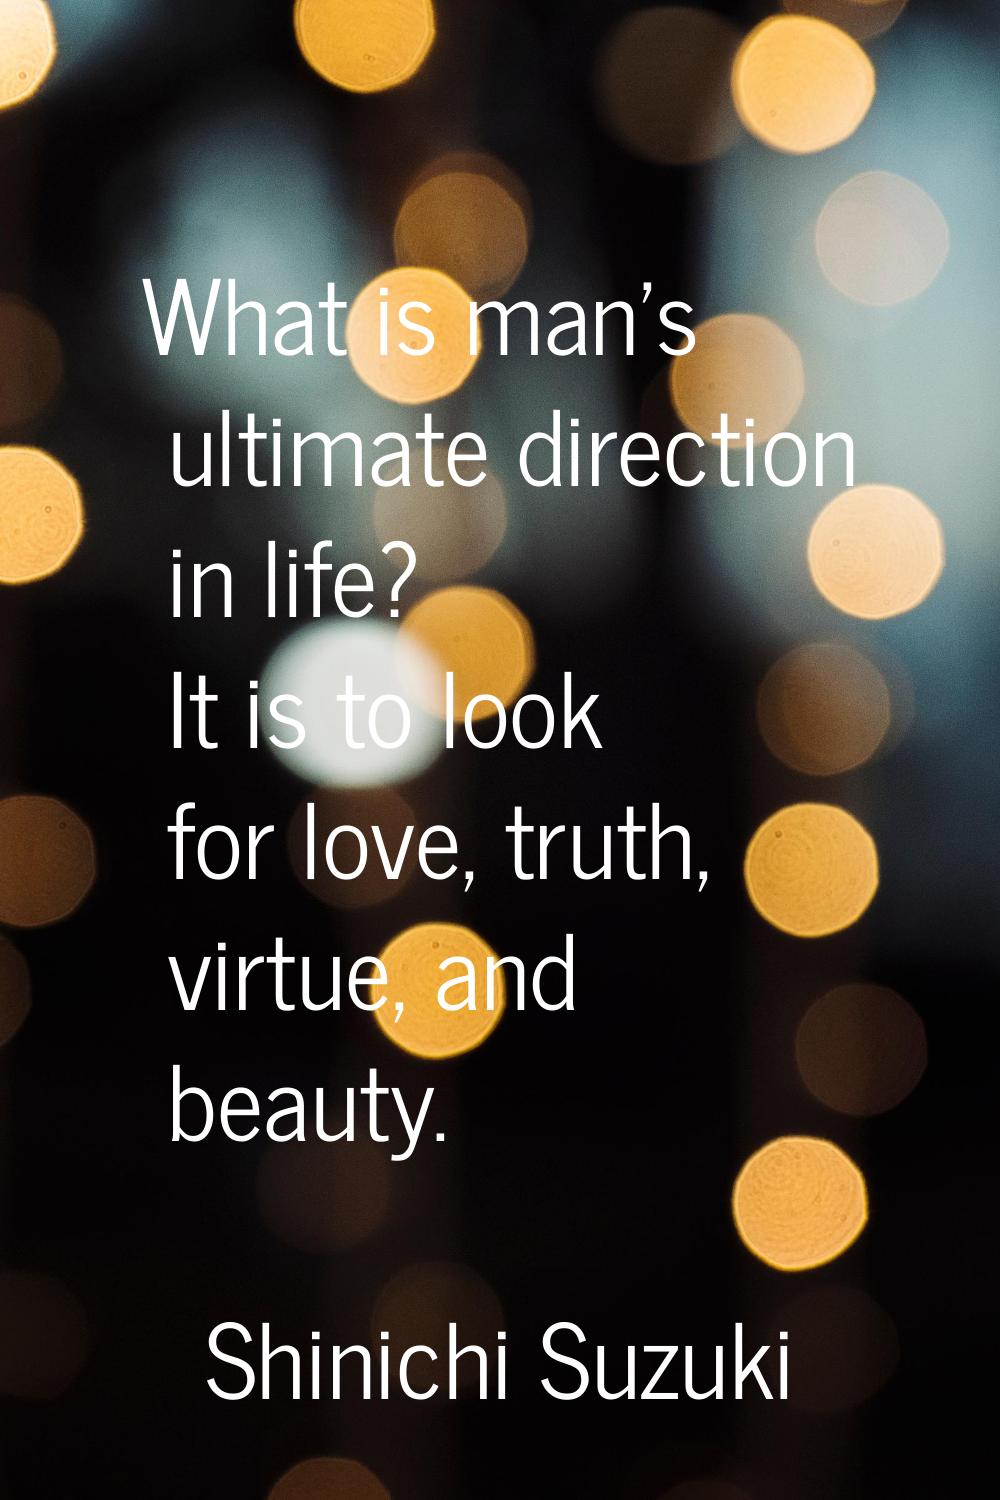 What is man's ultimate direction in life? It is to look for love, truth, virtue, and beauty.